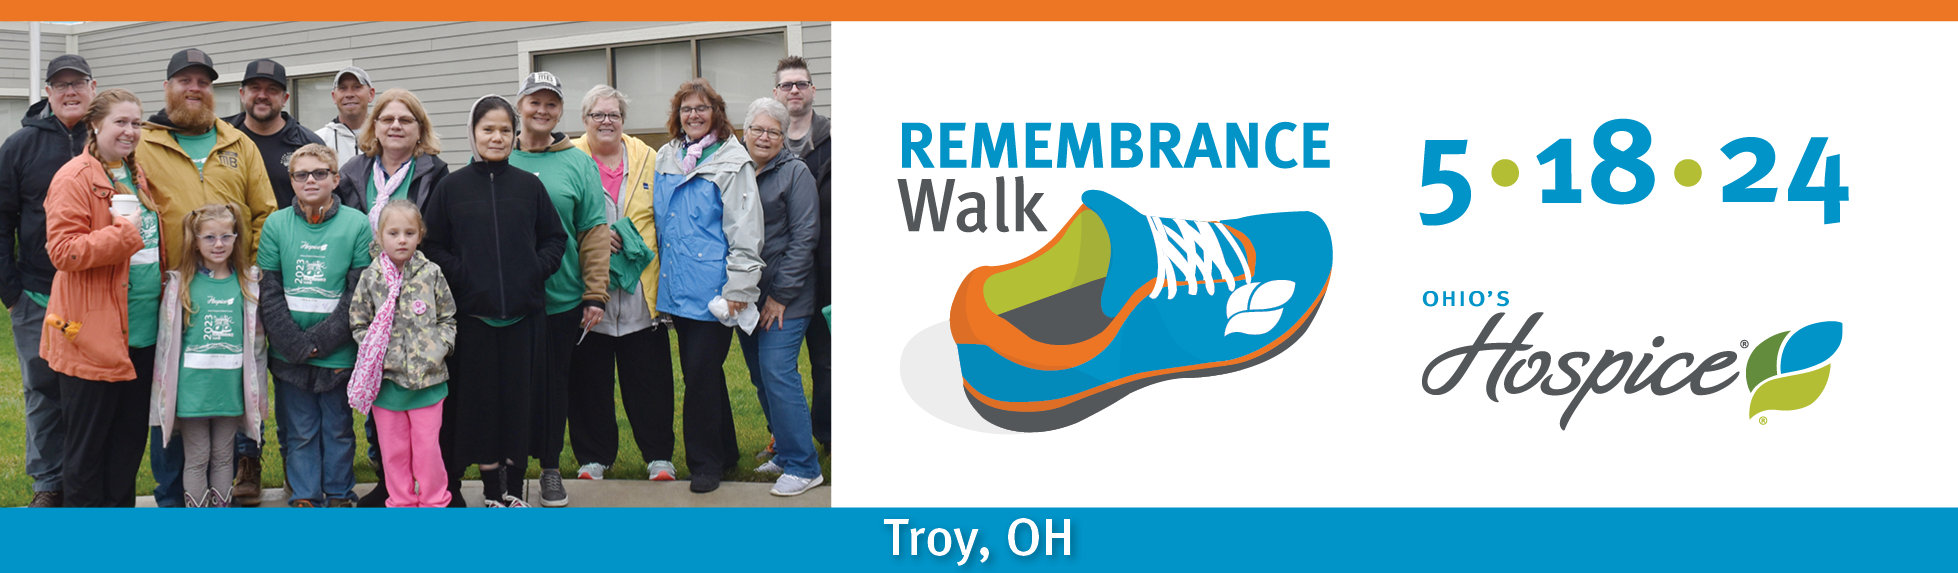 Ohio's Hospice of Miami County Remembrance Walk 5.18.24 Troy, OH